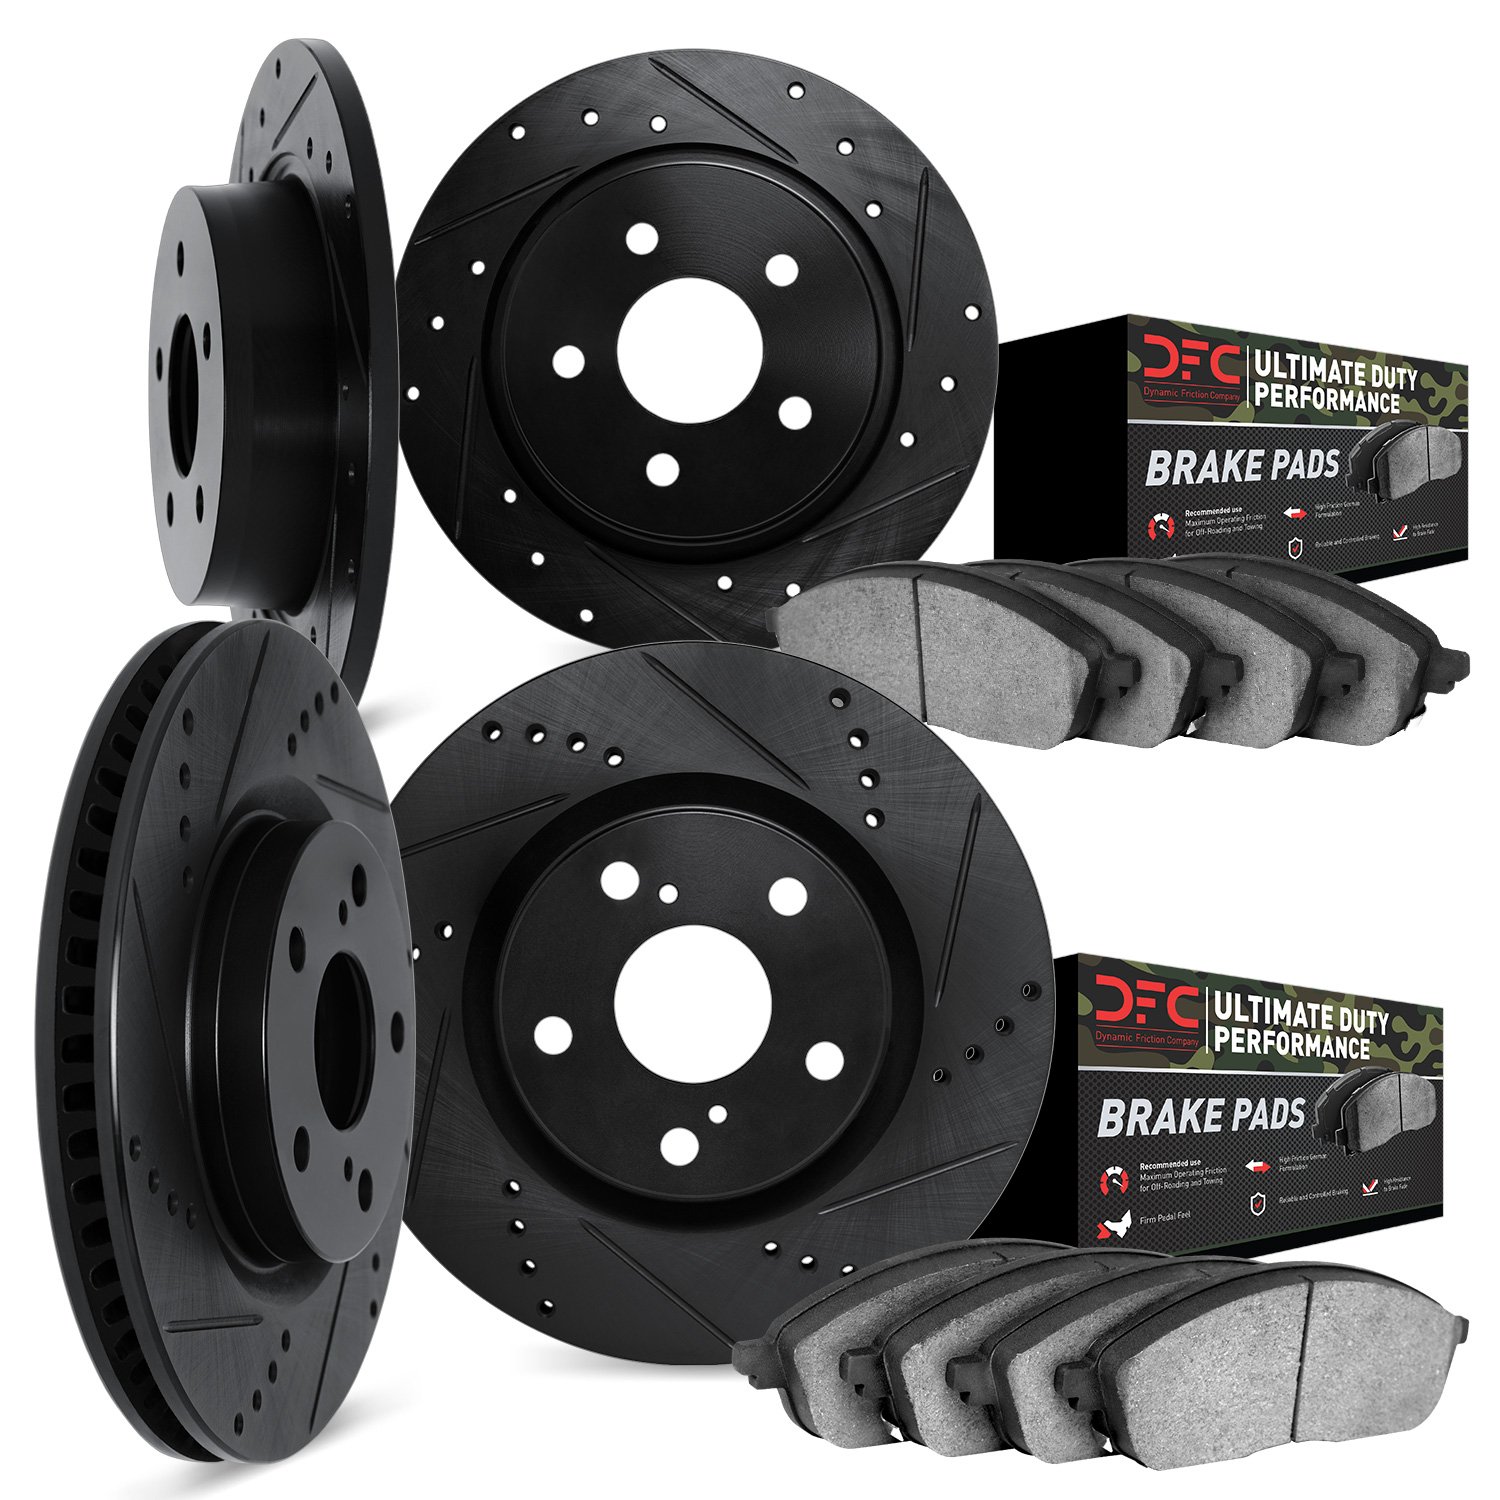 8404-54028 Drilled/Slotted Brake Rotors with Ultimate-Duty Brake Pads Kit [Black], 1997-2002 Ford/Lincoln/Mercury/Mazda, Positio